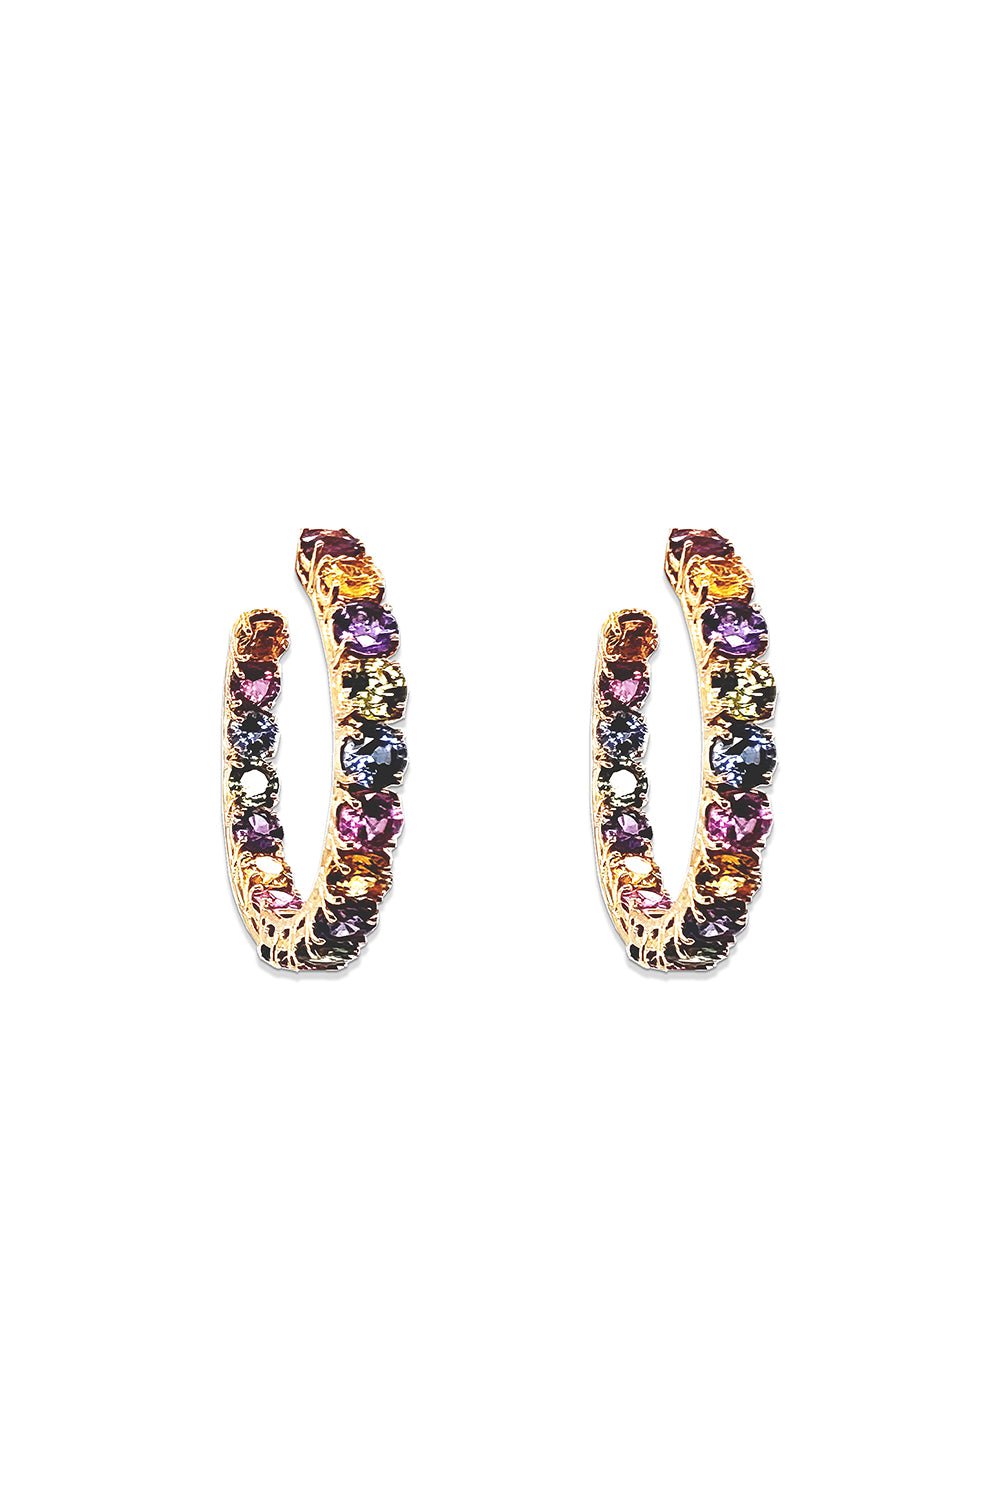 BAYCO-Small Multicolor Sapphire Hoop Earrings-YELLOW GOLD